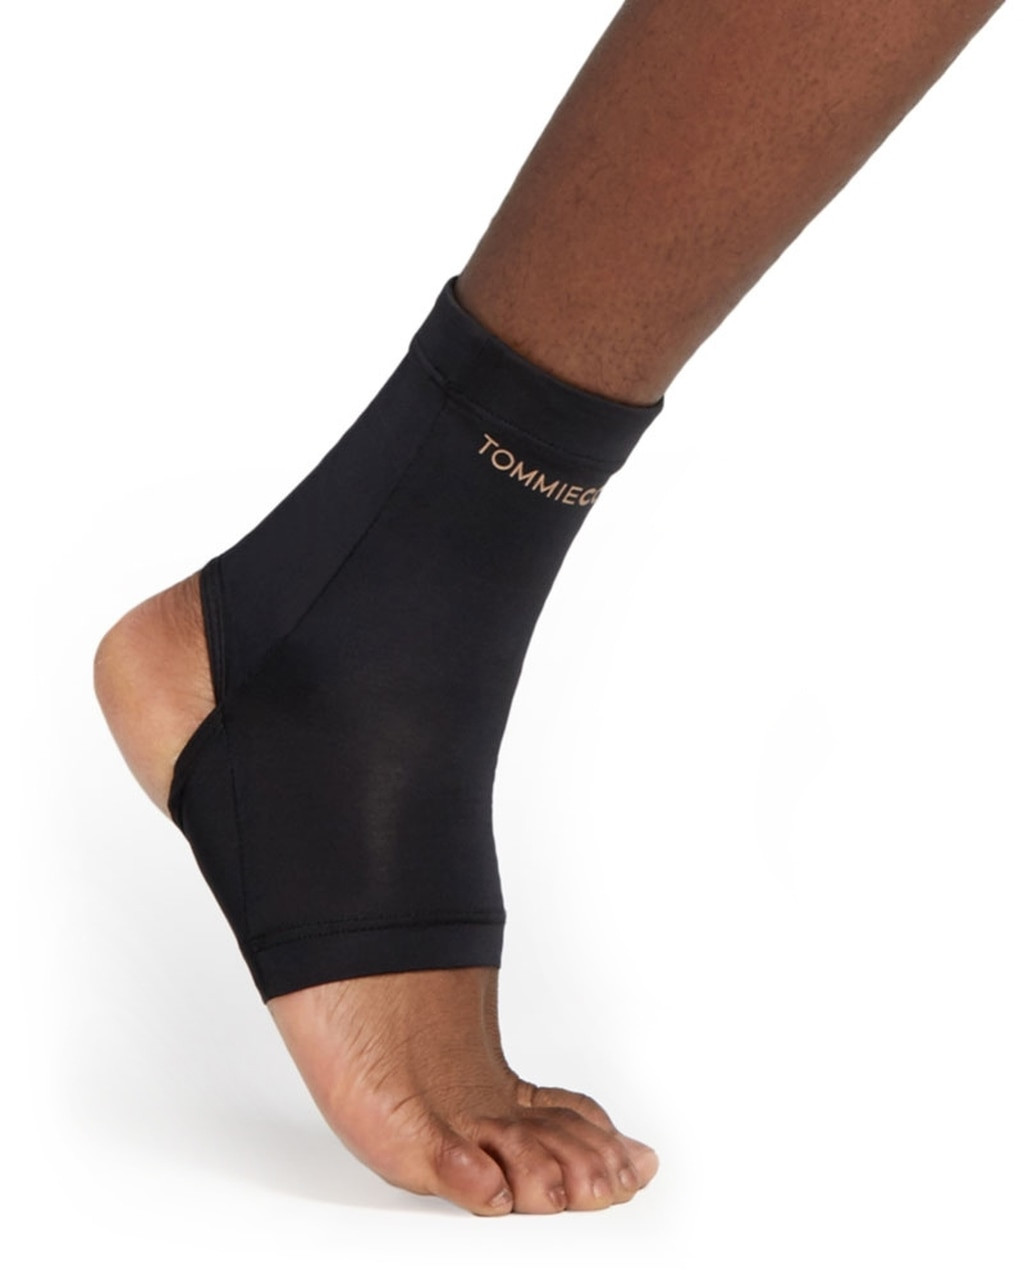 Tommie Copper Core Compression Infrared Knee Sleeve, Unisex, Men